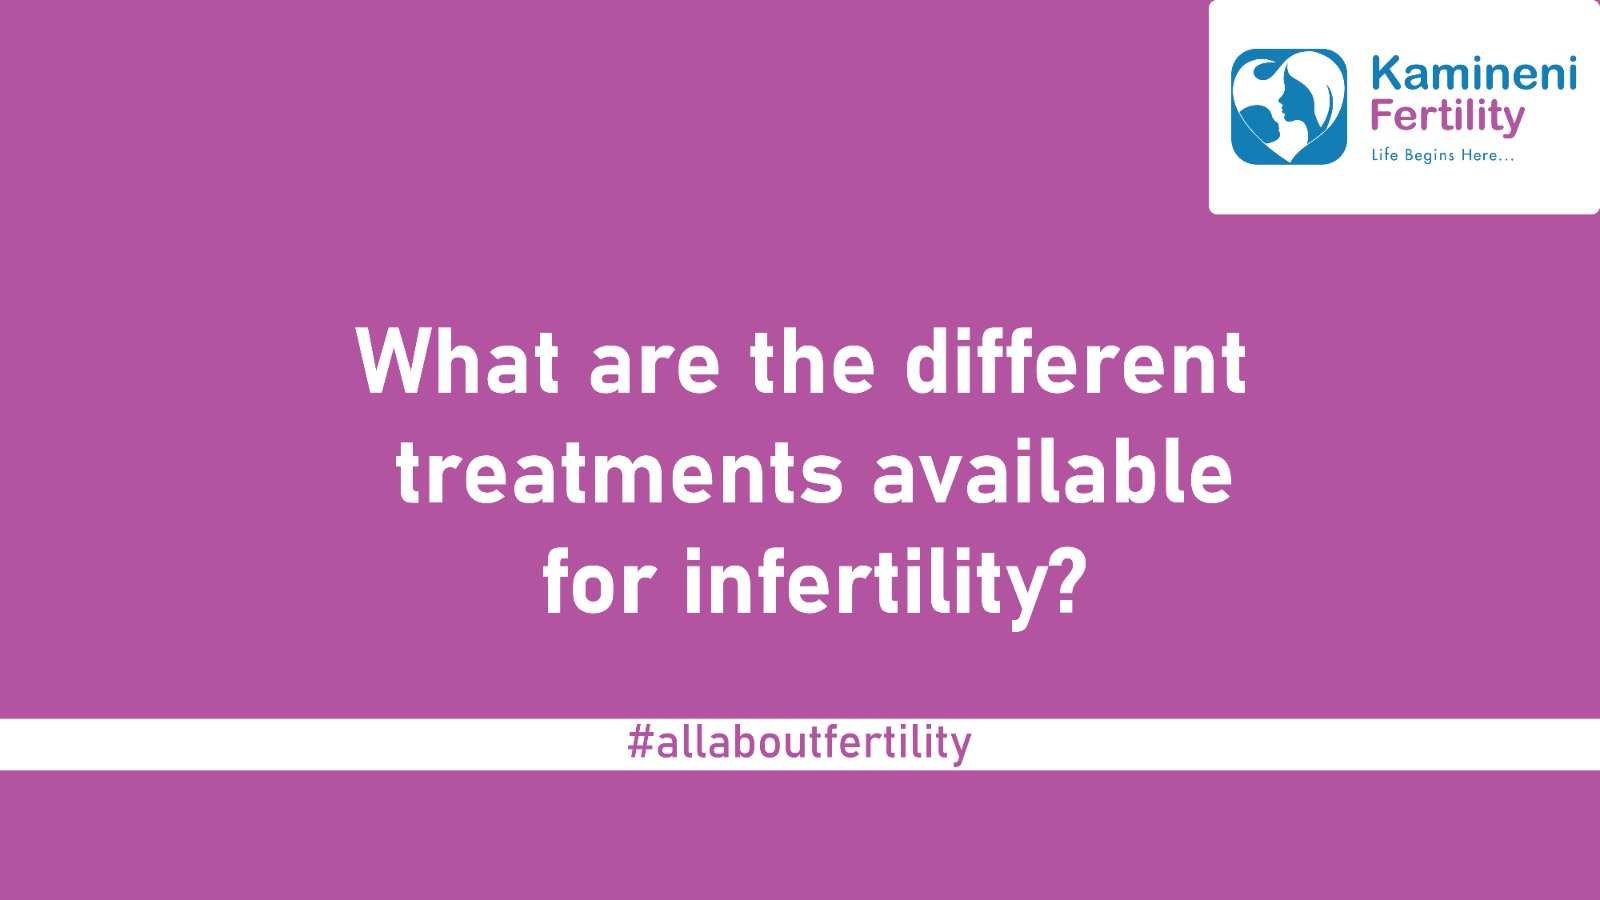 What are the different treatment available for Fertility?